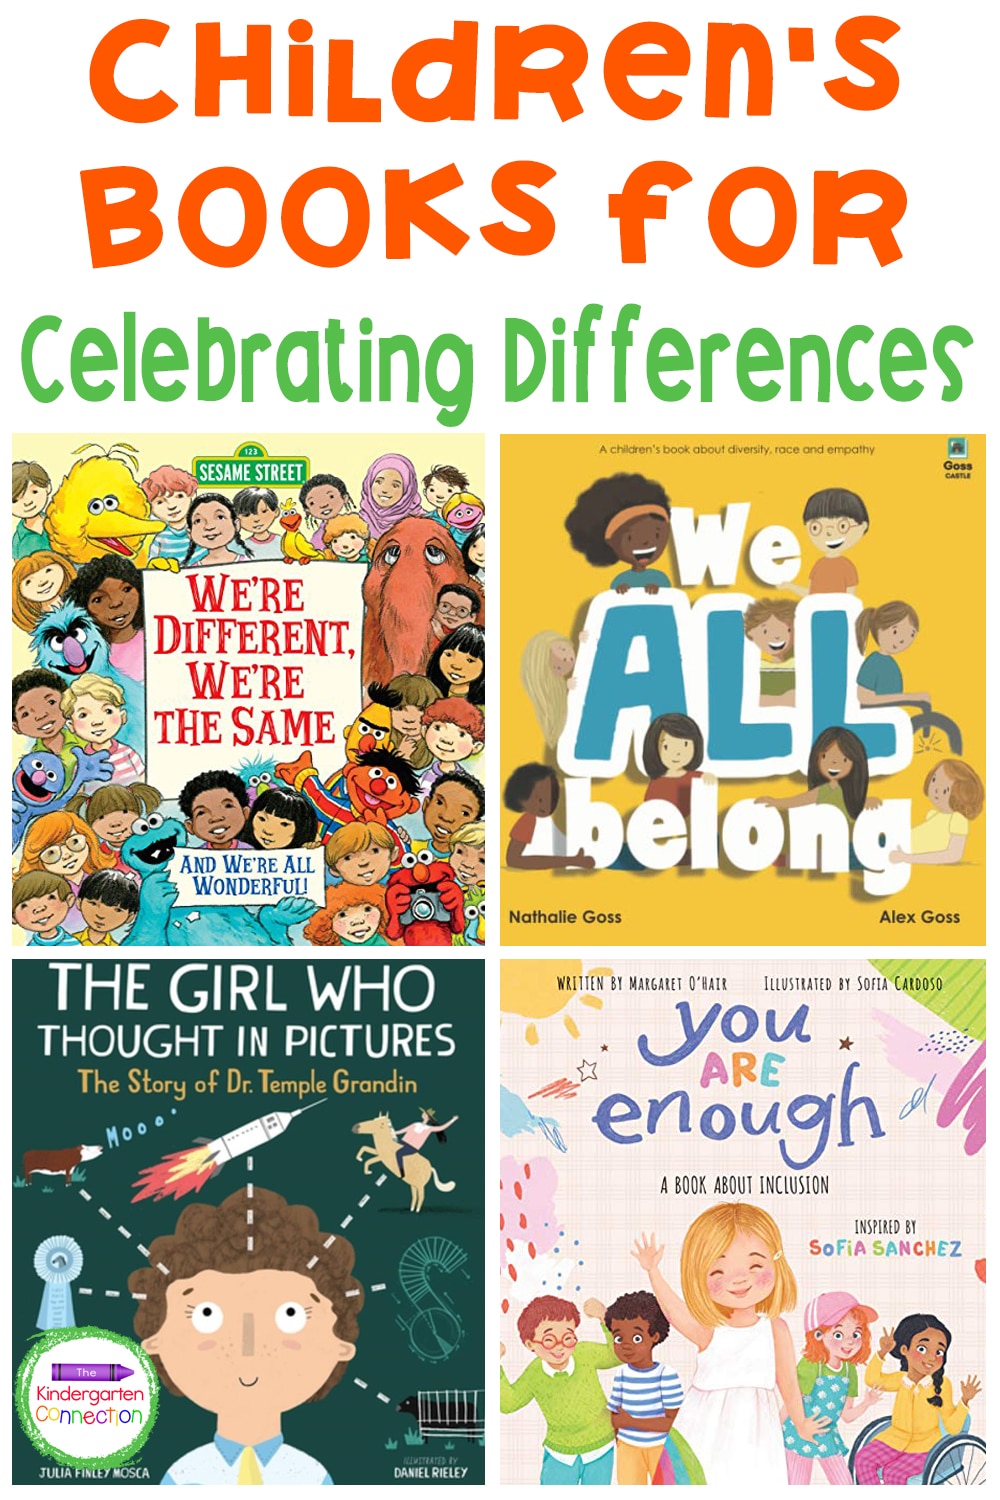 These Children's Books for Celebrating Differences offer sweet, simple stories about celebrating differences and how they make us special!